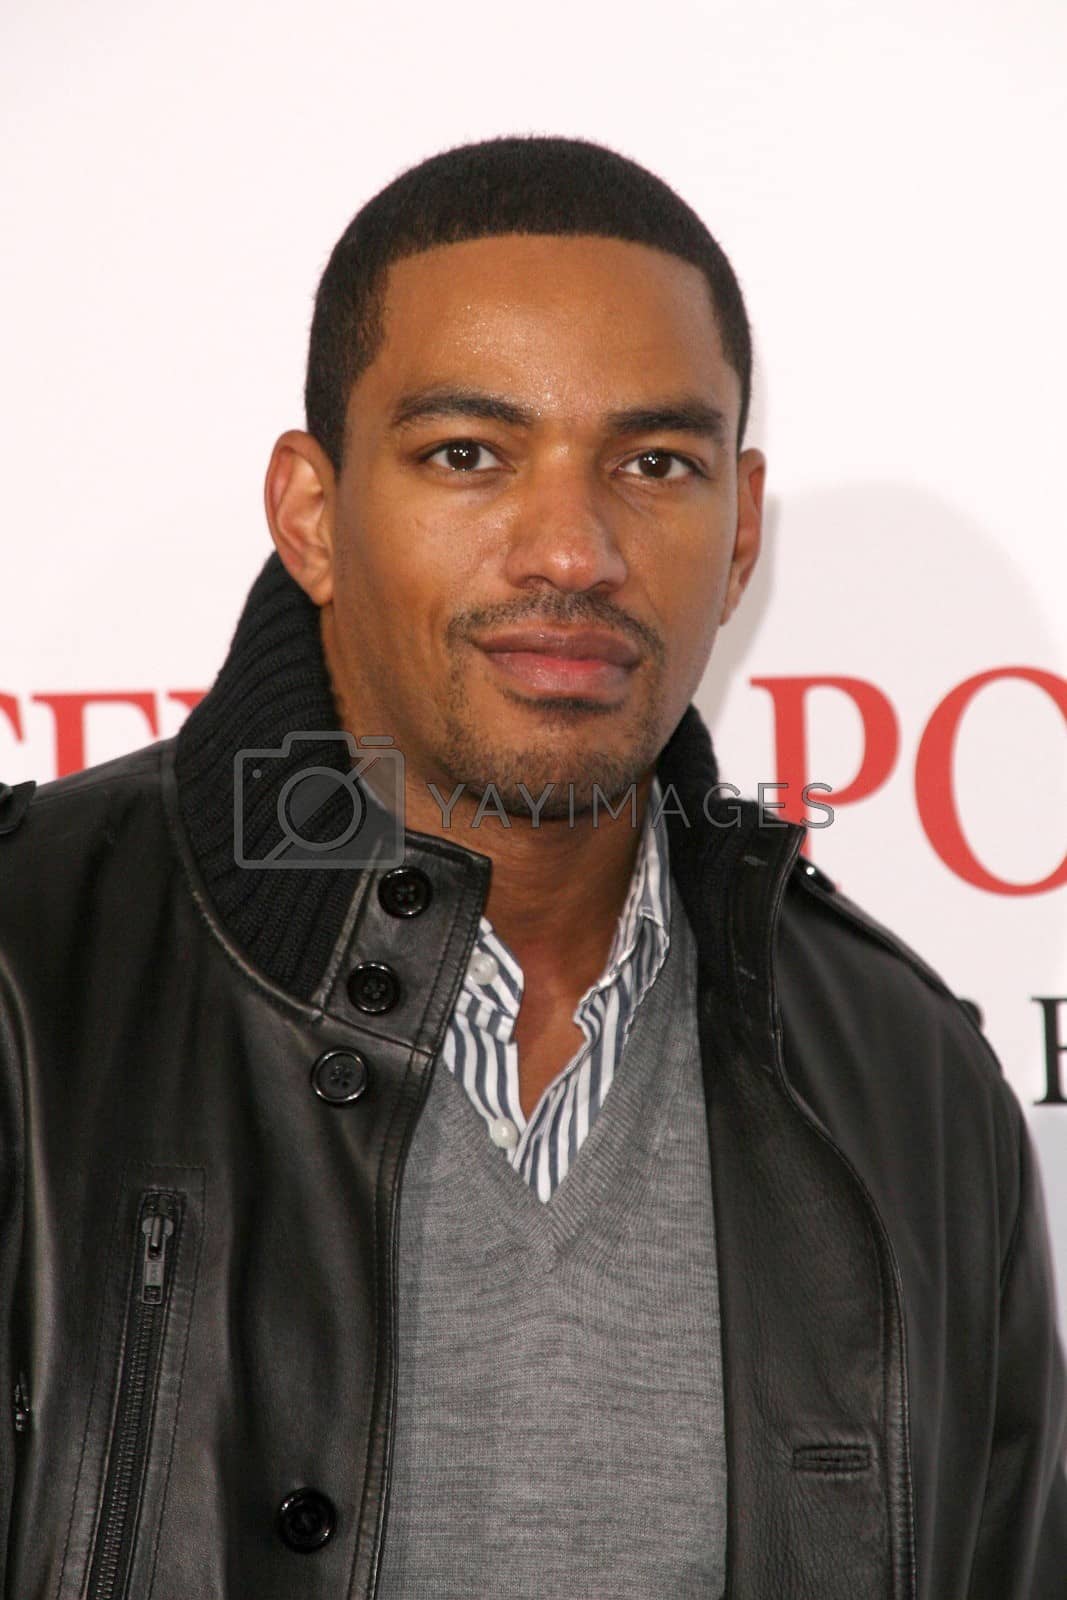 Royalty free image of Laz Alonso /ImageCollect by ImageCollect